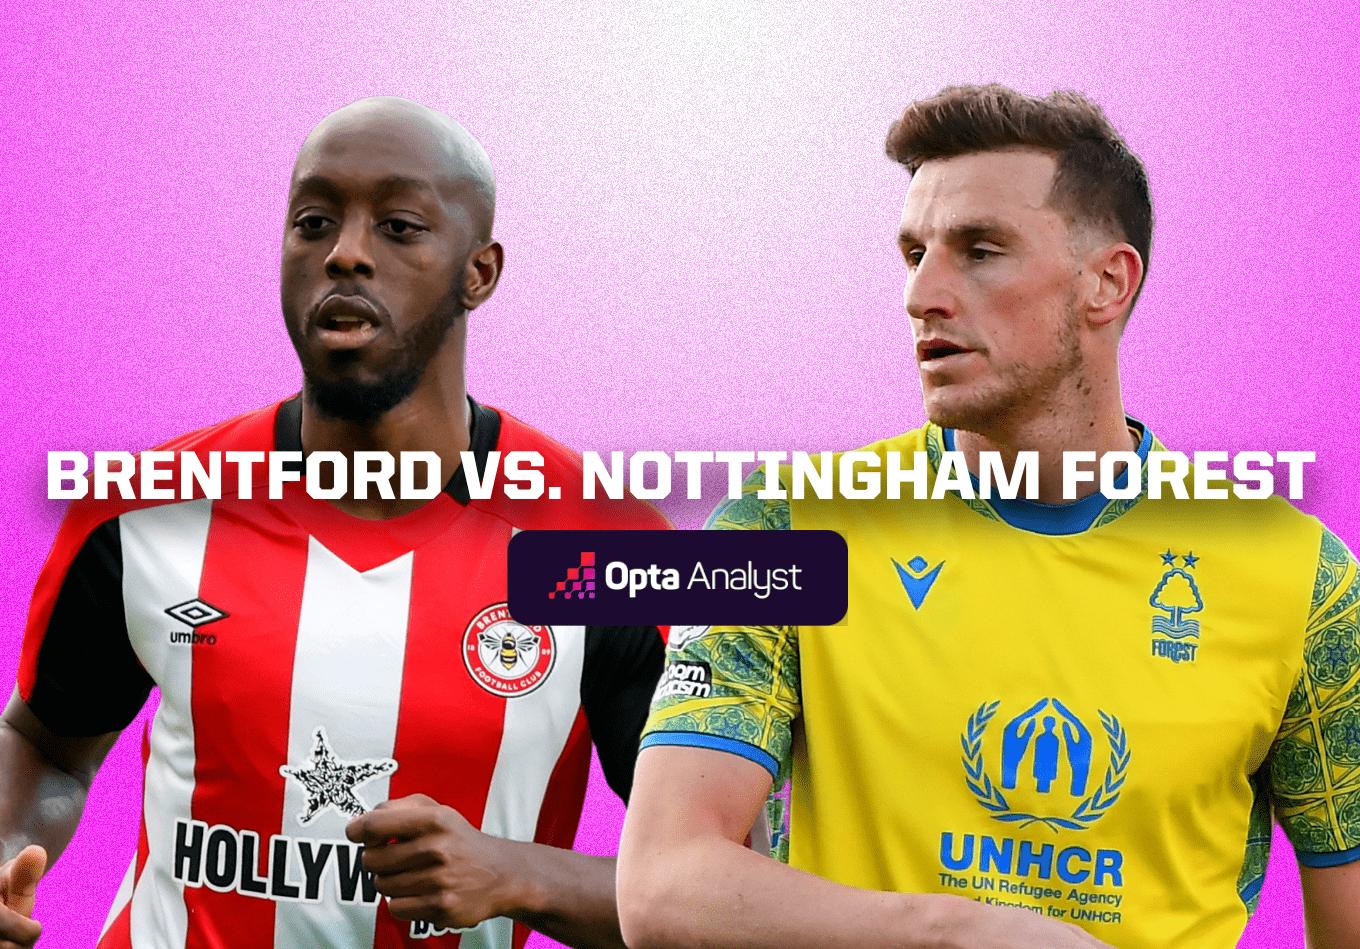 Brentford vs Nottingham Forest: Prediction and Preview